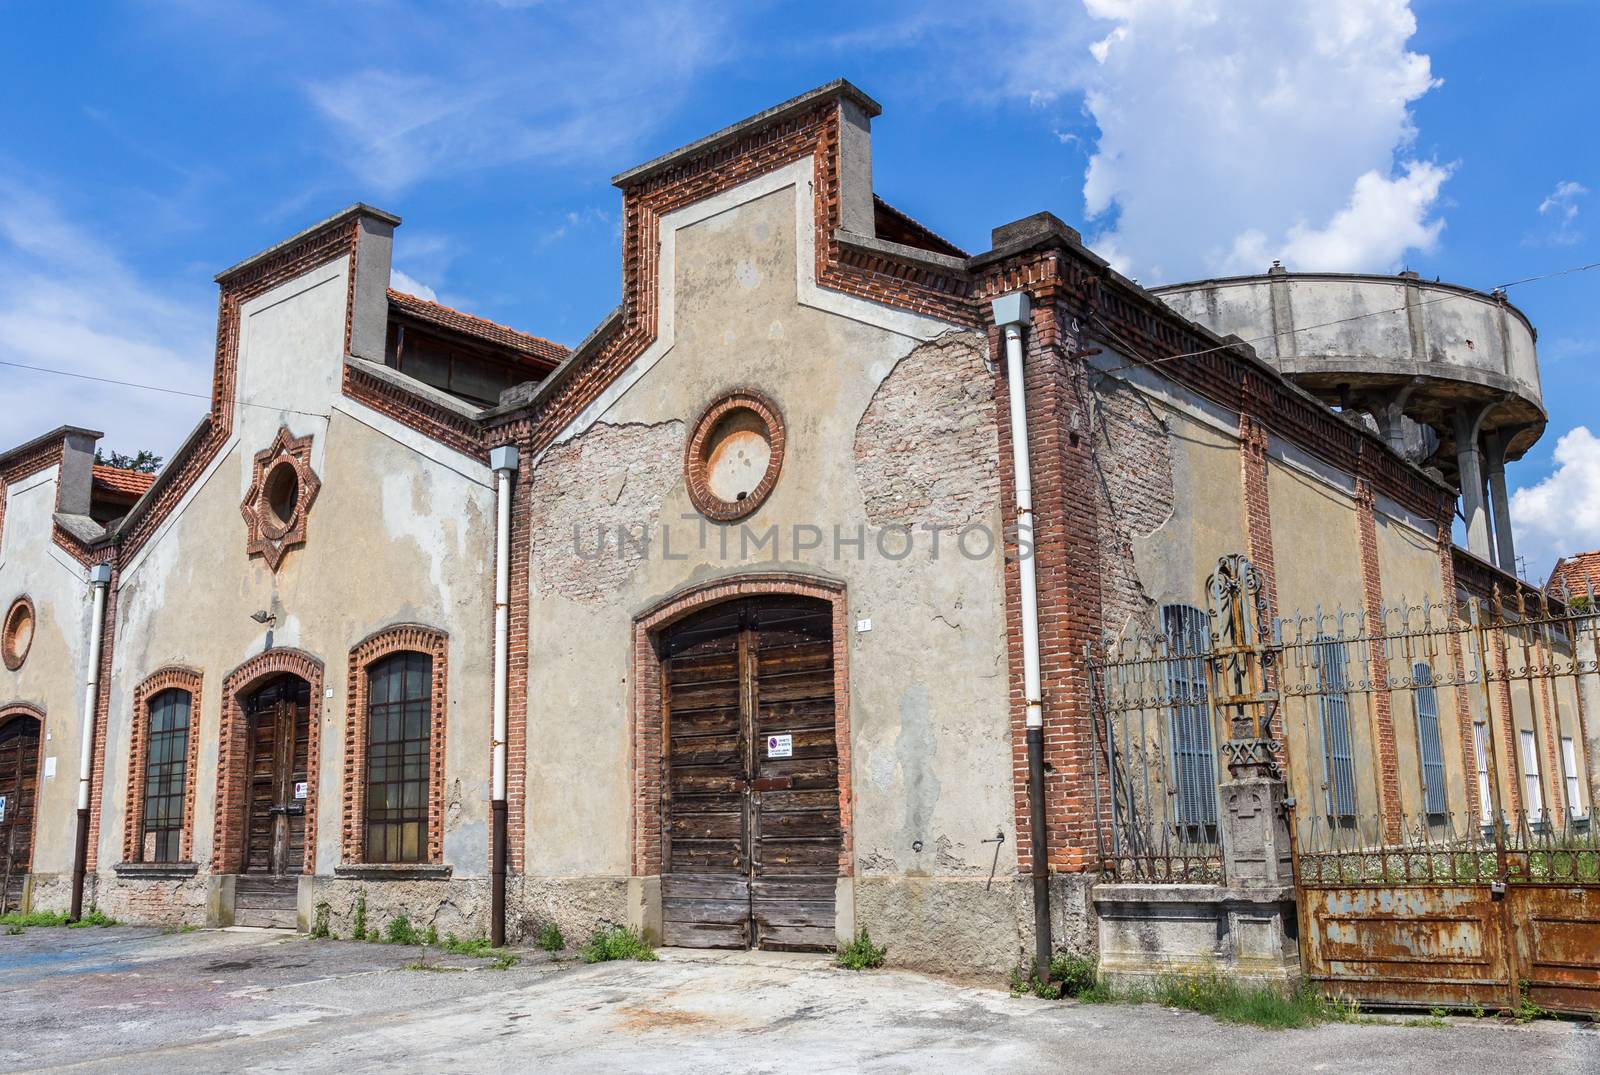 Typical buildings of Crespi d'Adda by germanopoli